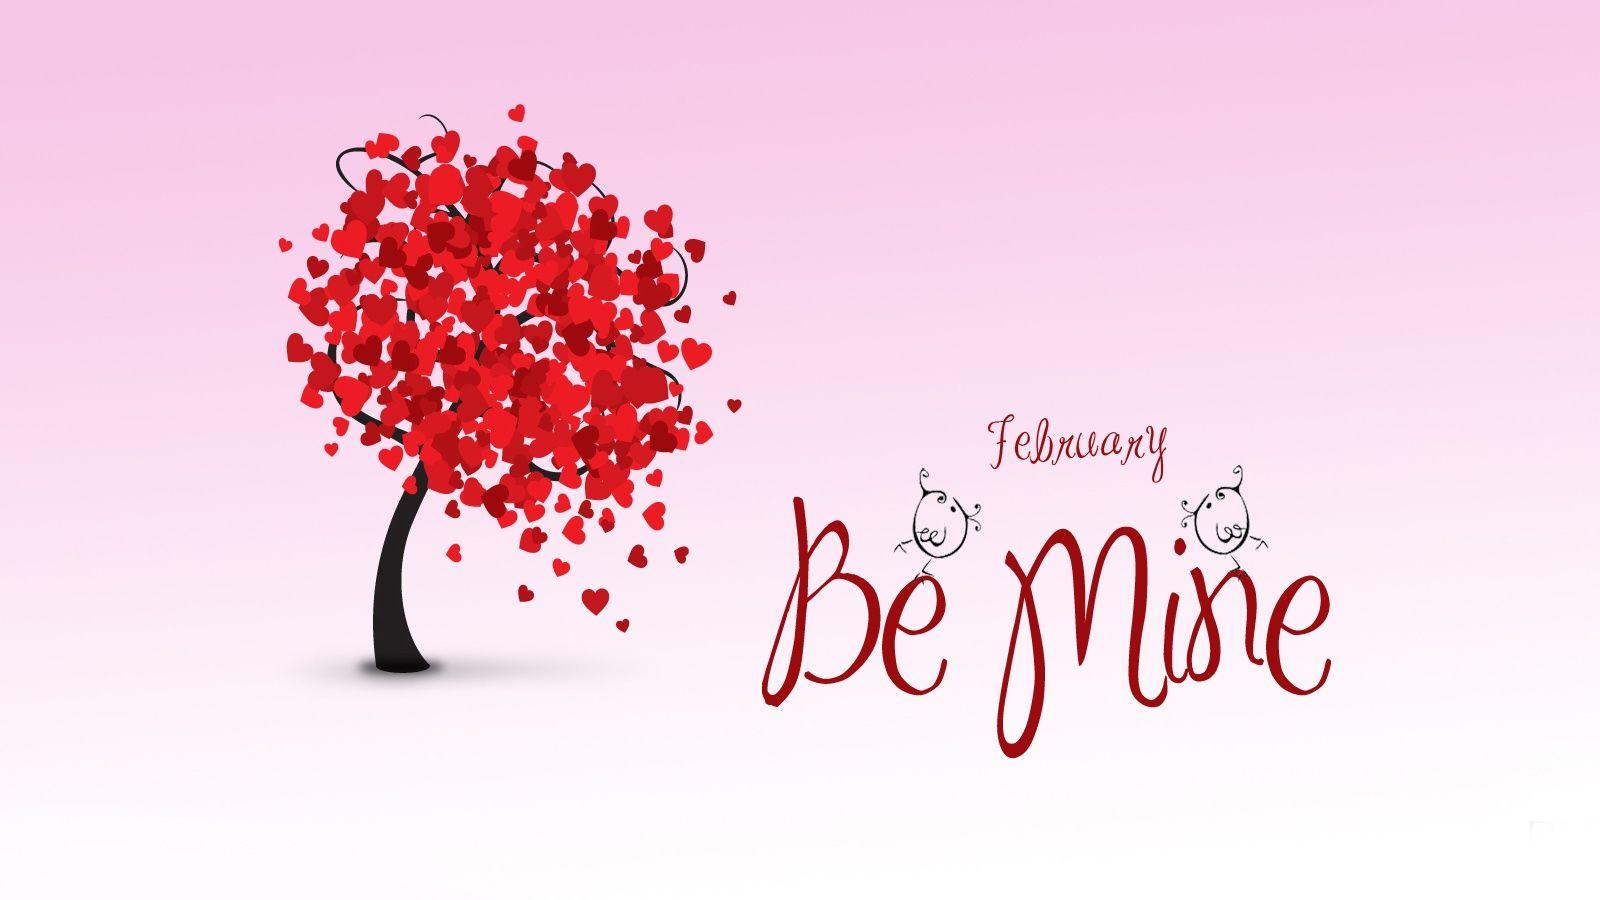 Valentines Day Image, HD Wallpaper, Photo, Picture, Pics